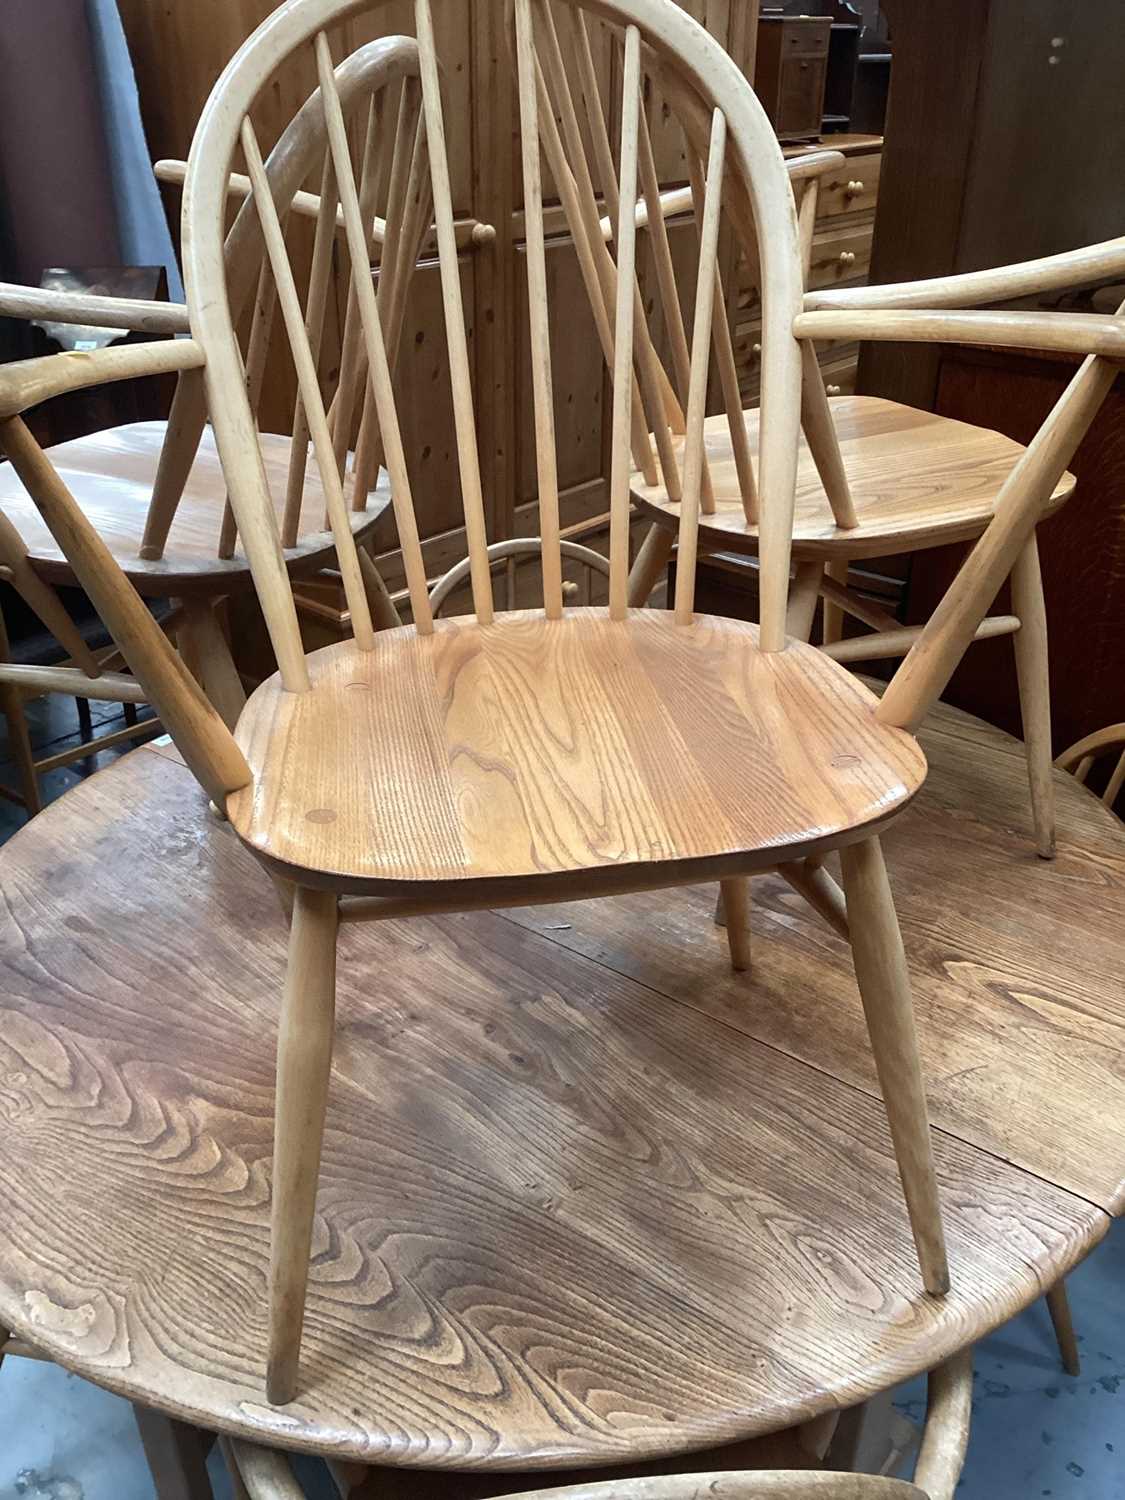 Ercol elm oval dropleaf kitchen table opening to 127 x 141cm and seven Ercol stick back chairs compr - Image 3 of 3